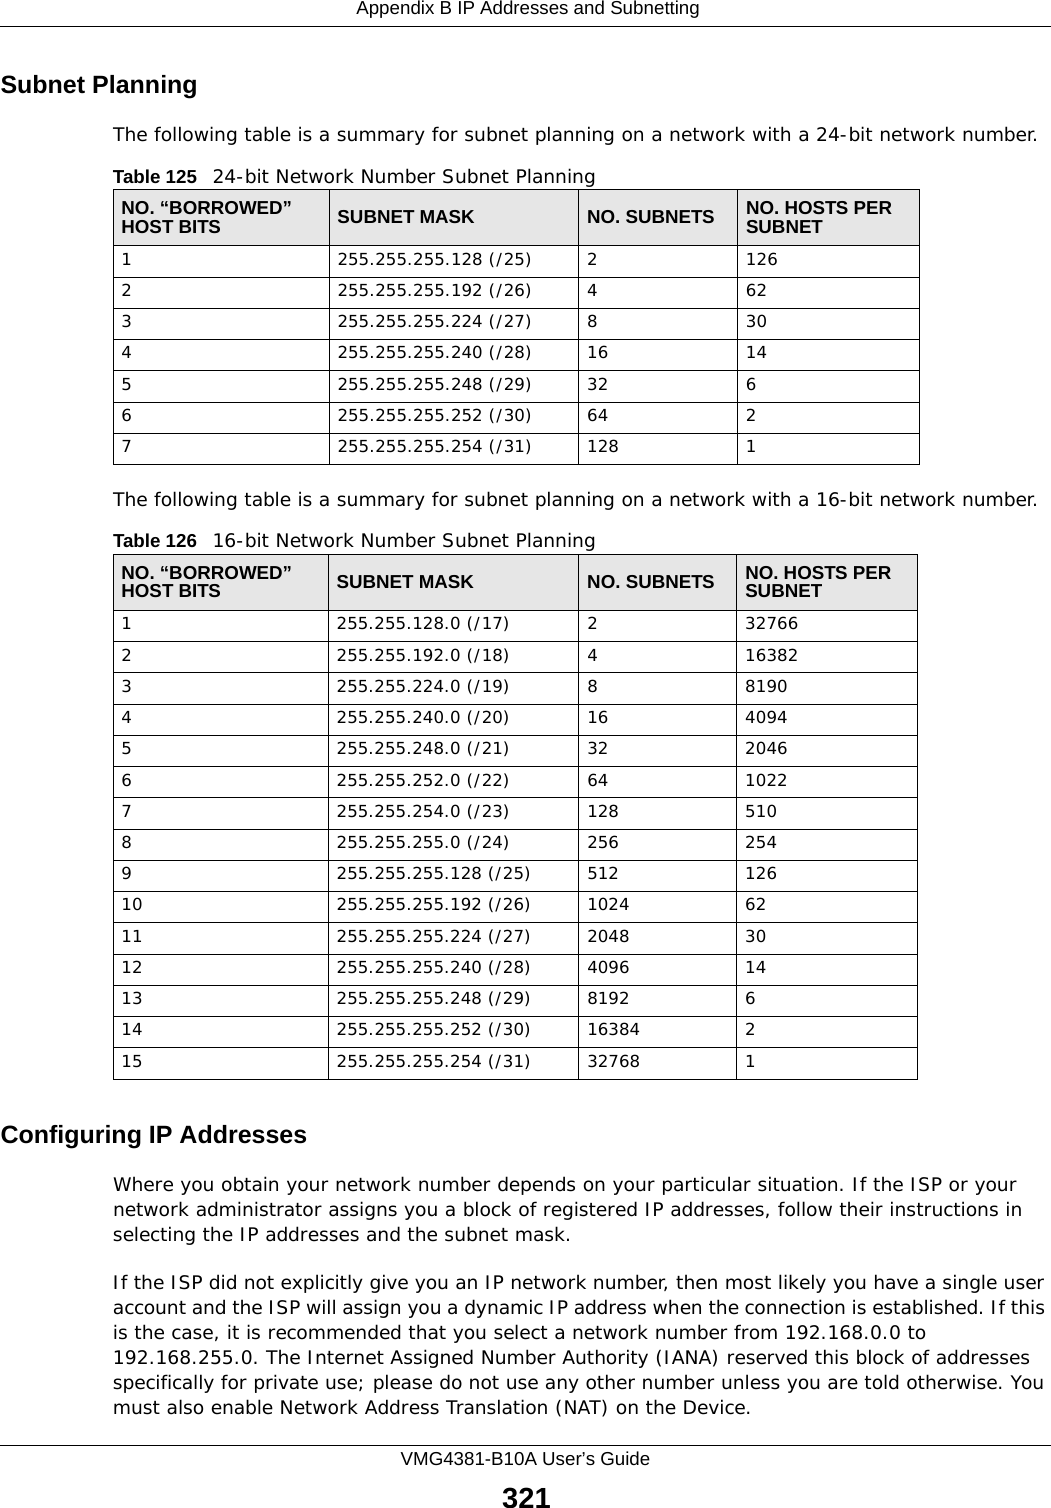  Appendix B IP Addresses and SubnettingVMG4381-B10A User’s Guide321Subnet PlanningThe following table is a summary for subnet planning on a network with a 24-bit network number.The following table is a summary for subnet planning on a network with a 16-bit network number. Configuring IP AddressesWhere you obtain your network number depends on your particular situation. If the ISP or your network administrator assigns you a block of registered IP addresses, follow their instructions in selecting the IP addresses and the subnet mask.If the ISP did not explicitly give you an IP network number, then most likely you have a single user account and the ISP will assign you a dynamic IP address when the connection is established. If this is the case, it is recommended that you select a network number from 192.168.0.0 to 192.168.255.0. The Internet Assigned Number Authority (IANA) reserved this block of addresses specifically for private use; please do not use any other number unless you are told otherwise. You must also enable Network Address Translation (NAT) on the Device. Table 125   24-bit Network Number Subnet PlanningNO. “BORROWED” HOST BITS SUBNET MASK NO. SUBNETS NO. HOSTS PER SUBNET1255.255.255.128 (/25) 21262255.255.255.192 (/26) 4623255.255.255.224 (/27) 8304255.255.255.240 (/28) 16 145255.255.255.248 (/29) 32 66255.255.255.252 (/30) 64 27255.255.255.254 (/31) 128 1Table 126   16-bit Network Number Subnet PlanningNO. “BORROWED” HOST BITS SUBNET MASK NO. SUBNETS NO. HOSTS PER SUBNET1255.255.128.0 (/17) 2327662255.255.192.0 (/18) 4163823255.255.224.0 (/19) 881904255.255.240.0 (/20) 16 40945255.255.248.0 (/21) 32 20466255.255.252.0 (/22) 64 10227255.255.254.0 (/23) 128 5108255.255.255.0 (/24) 256 2549255.255.255.128 (/25) 512 12610 255.255.255.192 (/26) 1024 6211 255.255.255.224 (/27) 2048 3012 255.255.255.240 (/28) 4096 1413 255.255.255.248 (/29) 8192 614 255.255.255.252 (/30) 16384 215 255.255.255.254 (/31) 32768 1